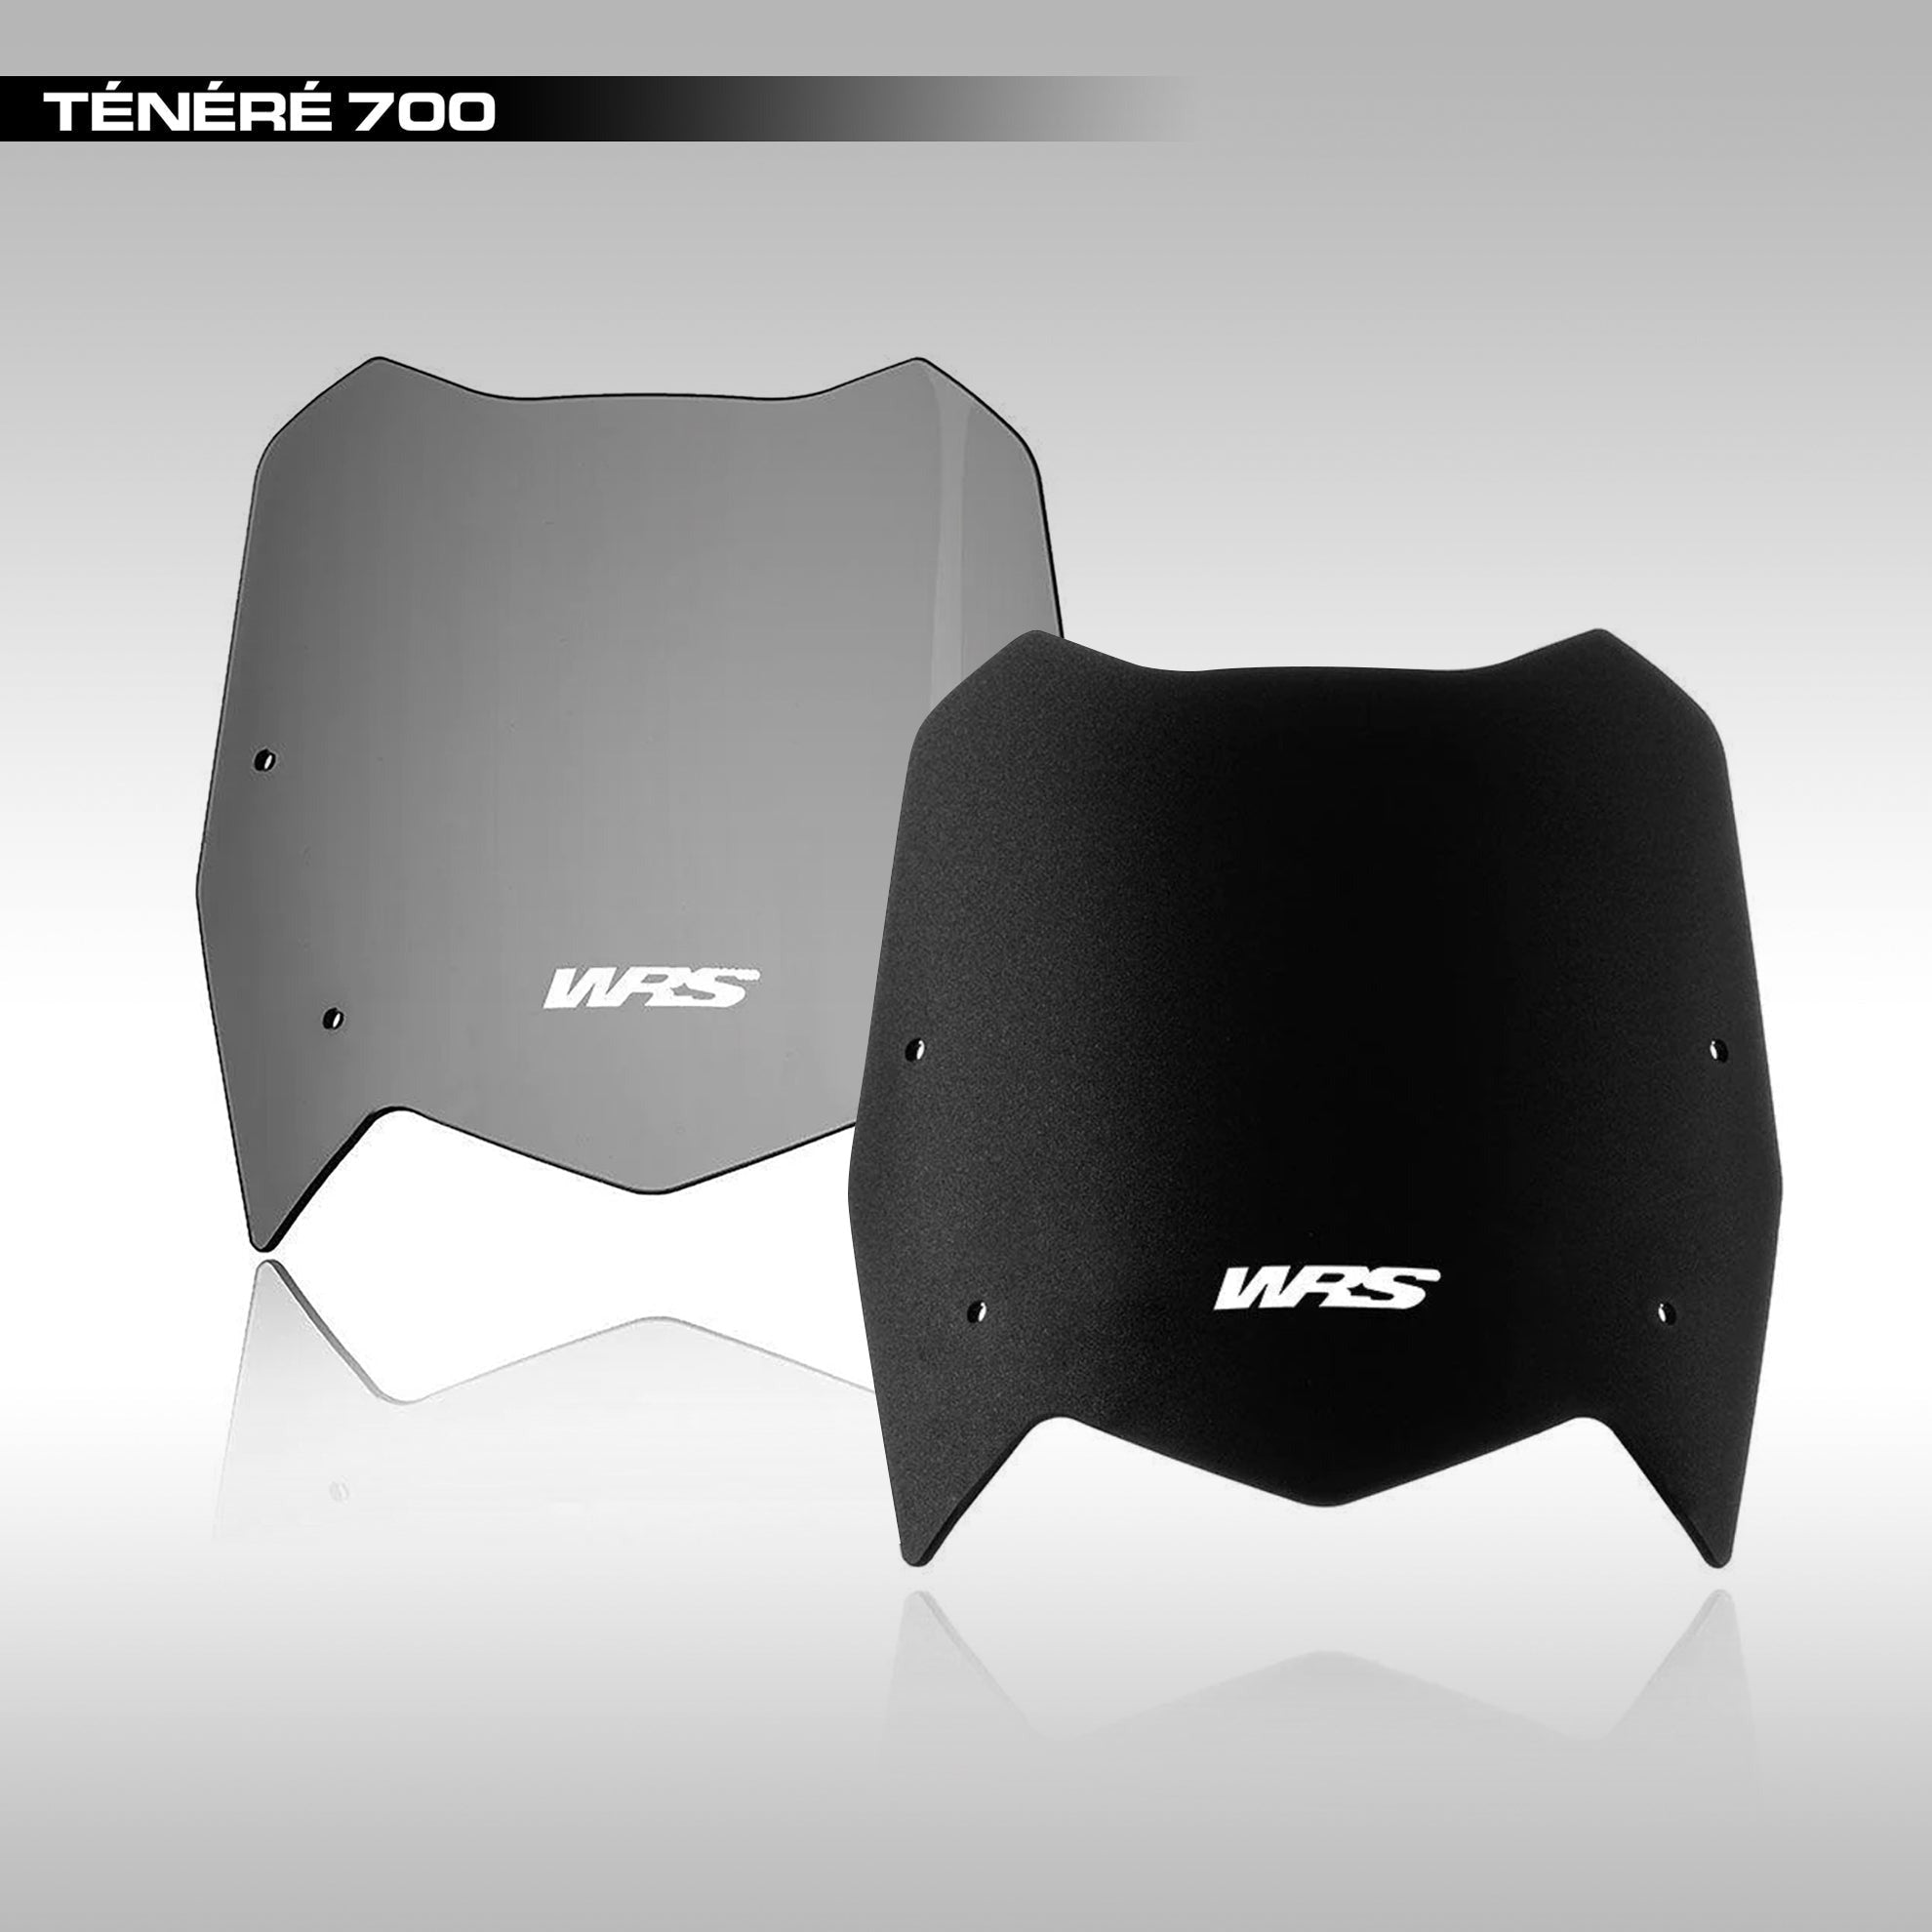 WRS Sport Windscreen for Yamaha Tenere 700. Give your T& a more aggressive look with a matter black or dark tint low profile windshield. 